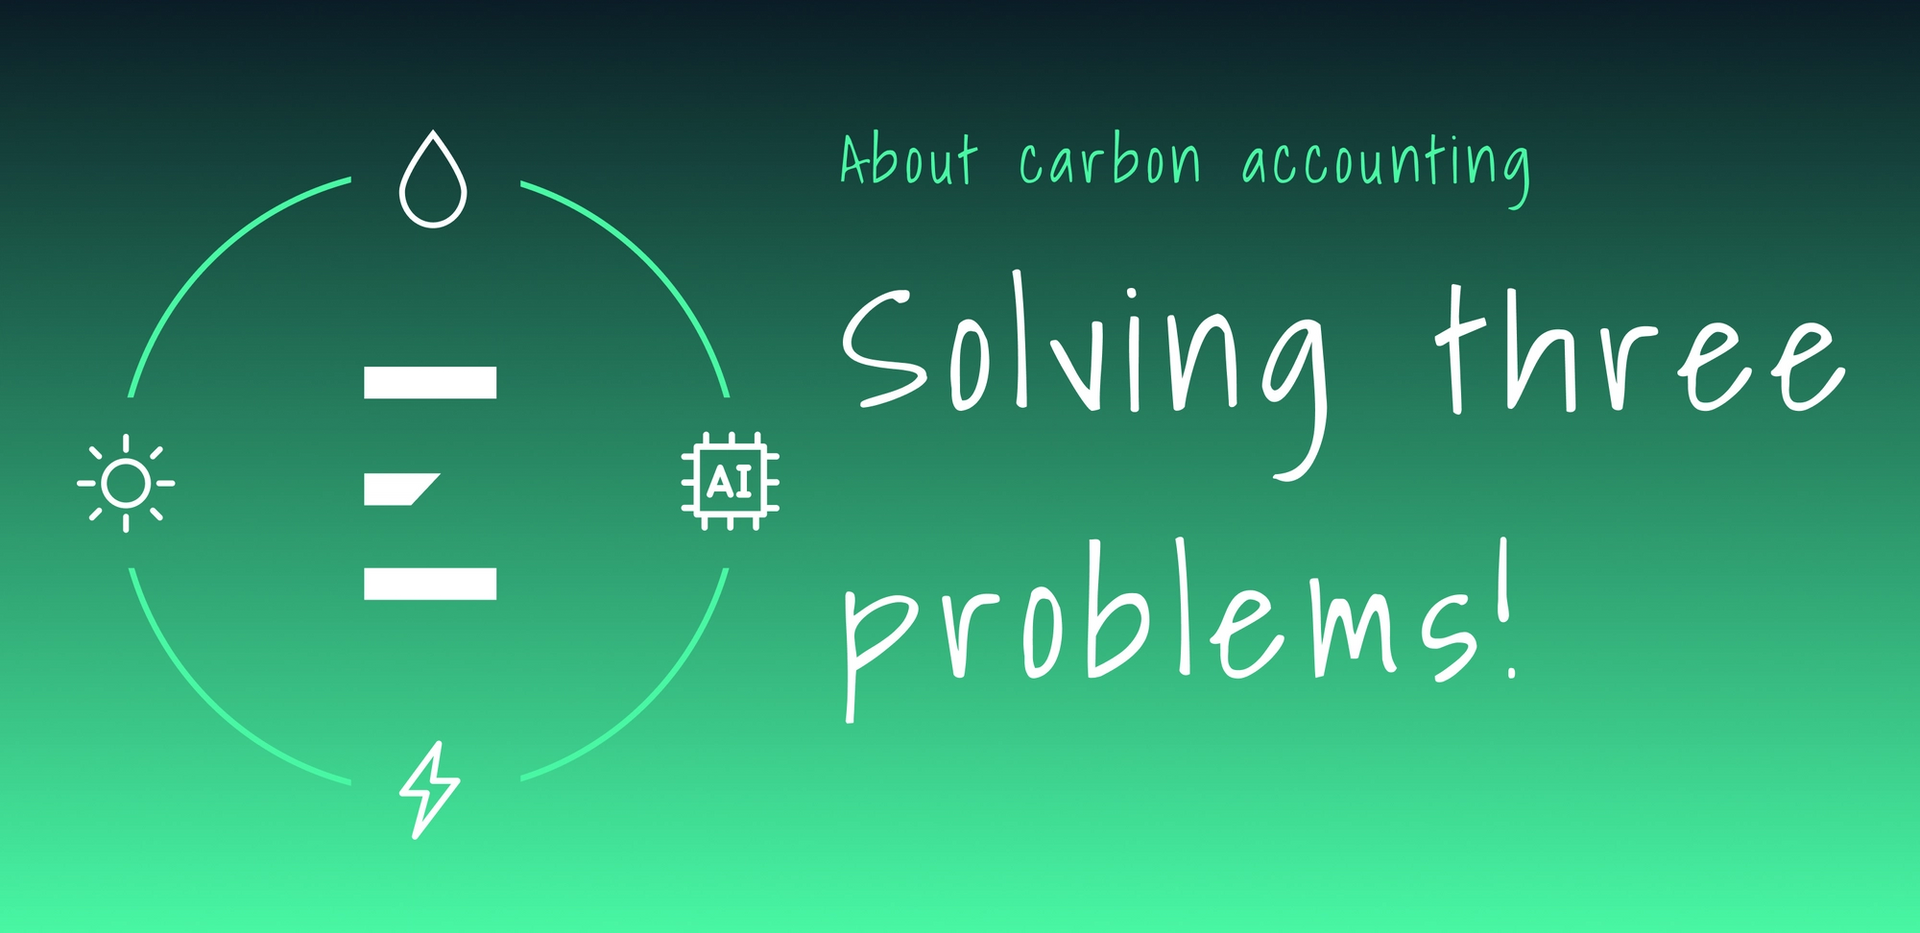 Energi.AI is solving three problems to supercharge carbon accounting for businesses 